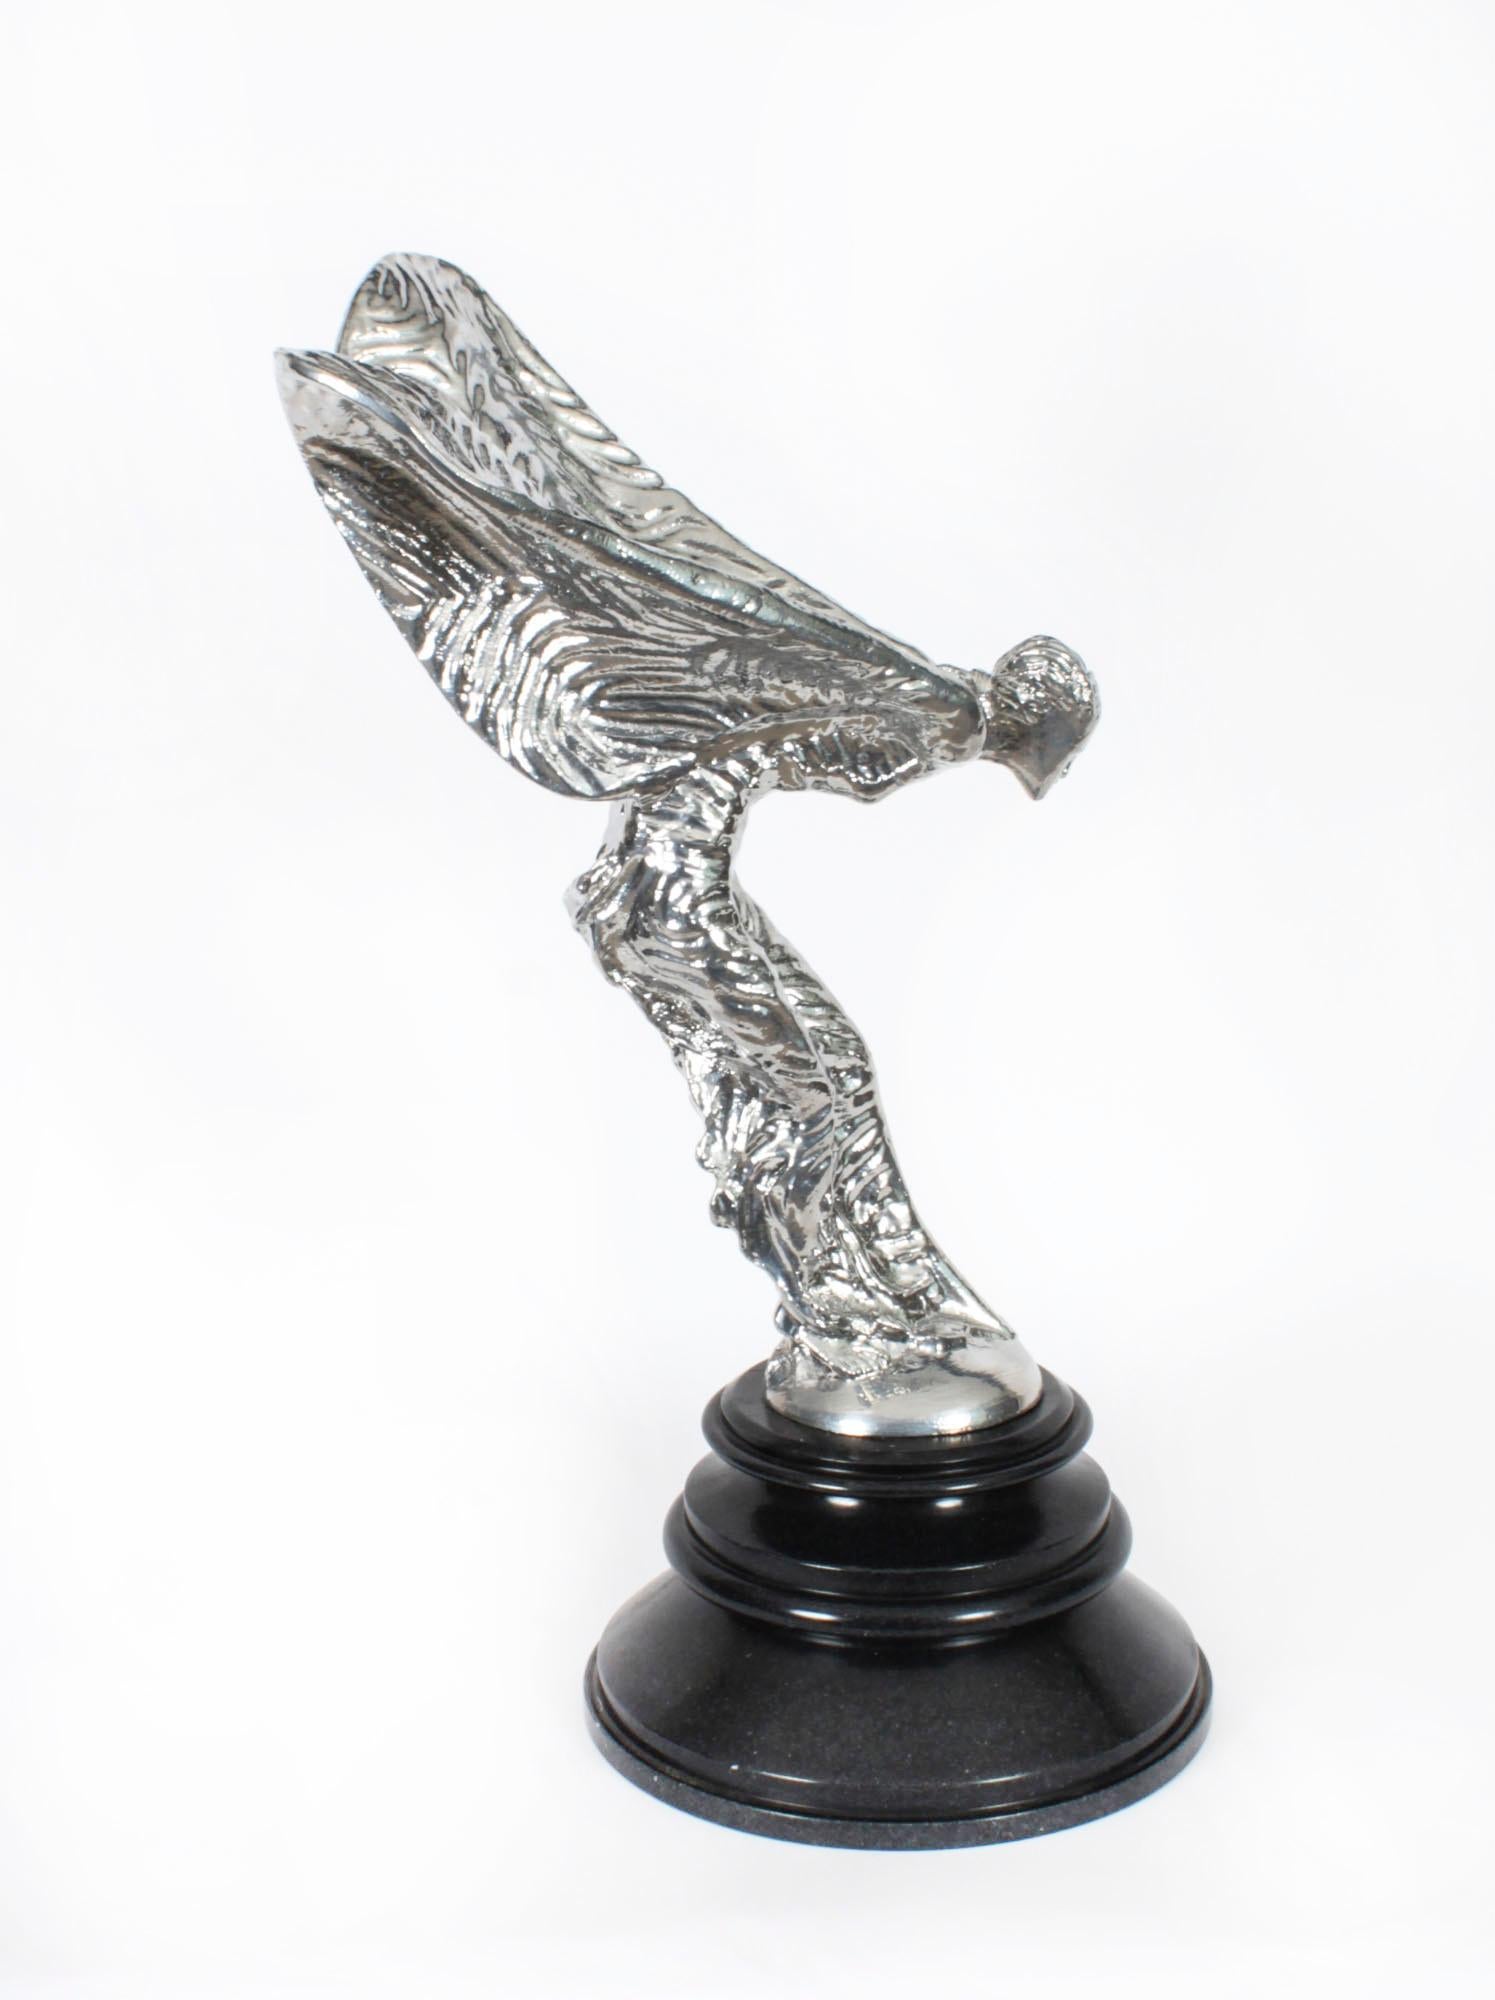 A large vintage decorative Rolls Royce silvered bronze sculpture, The Spirit of Ecstasy, dating from the mid 20th century.

The winged maiden was designed by Charles Robinson Sykes (1875-1950), and she stands on an attractive round black marble